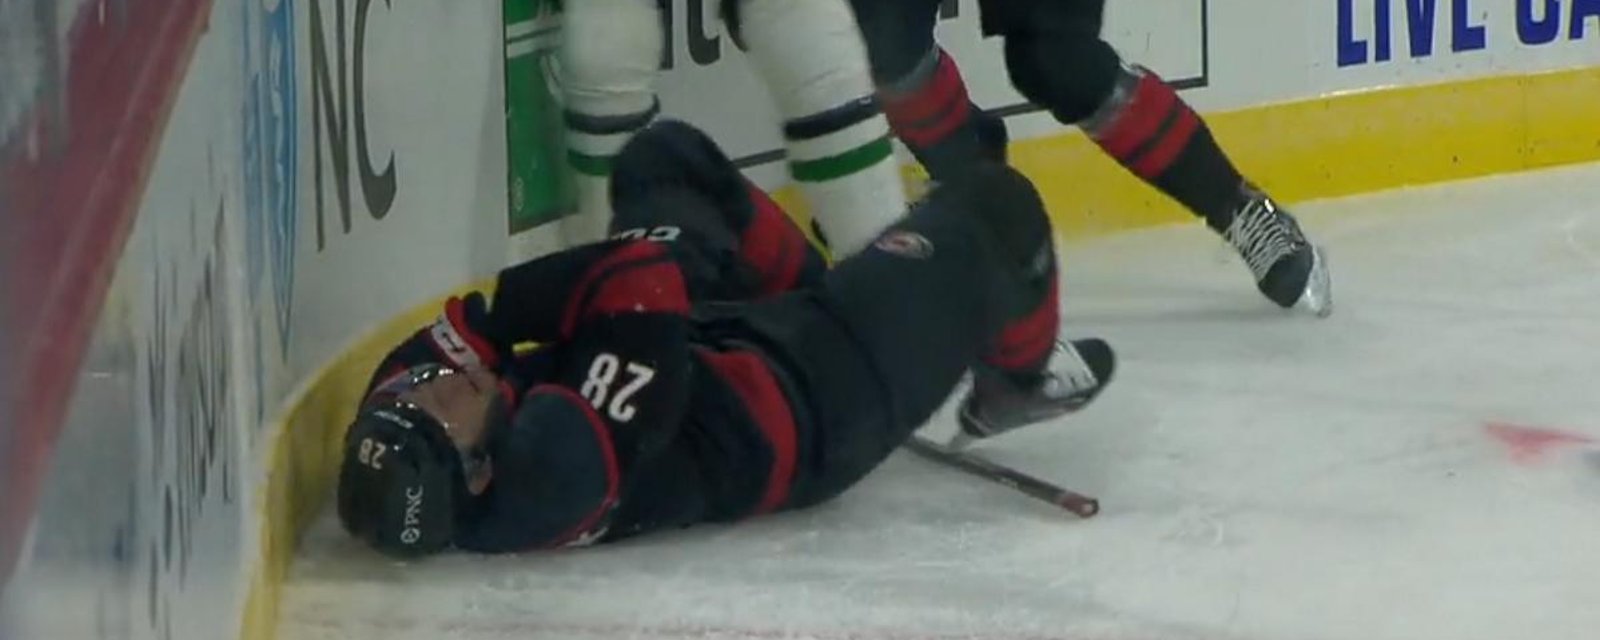 Blake Comeau crushes Max McCormick and sends him to the locker room.